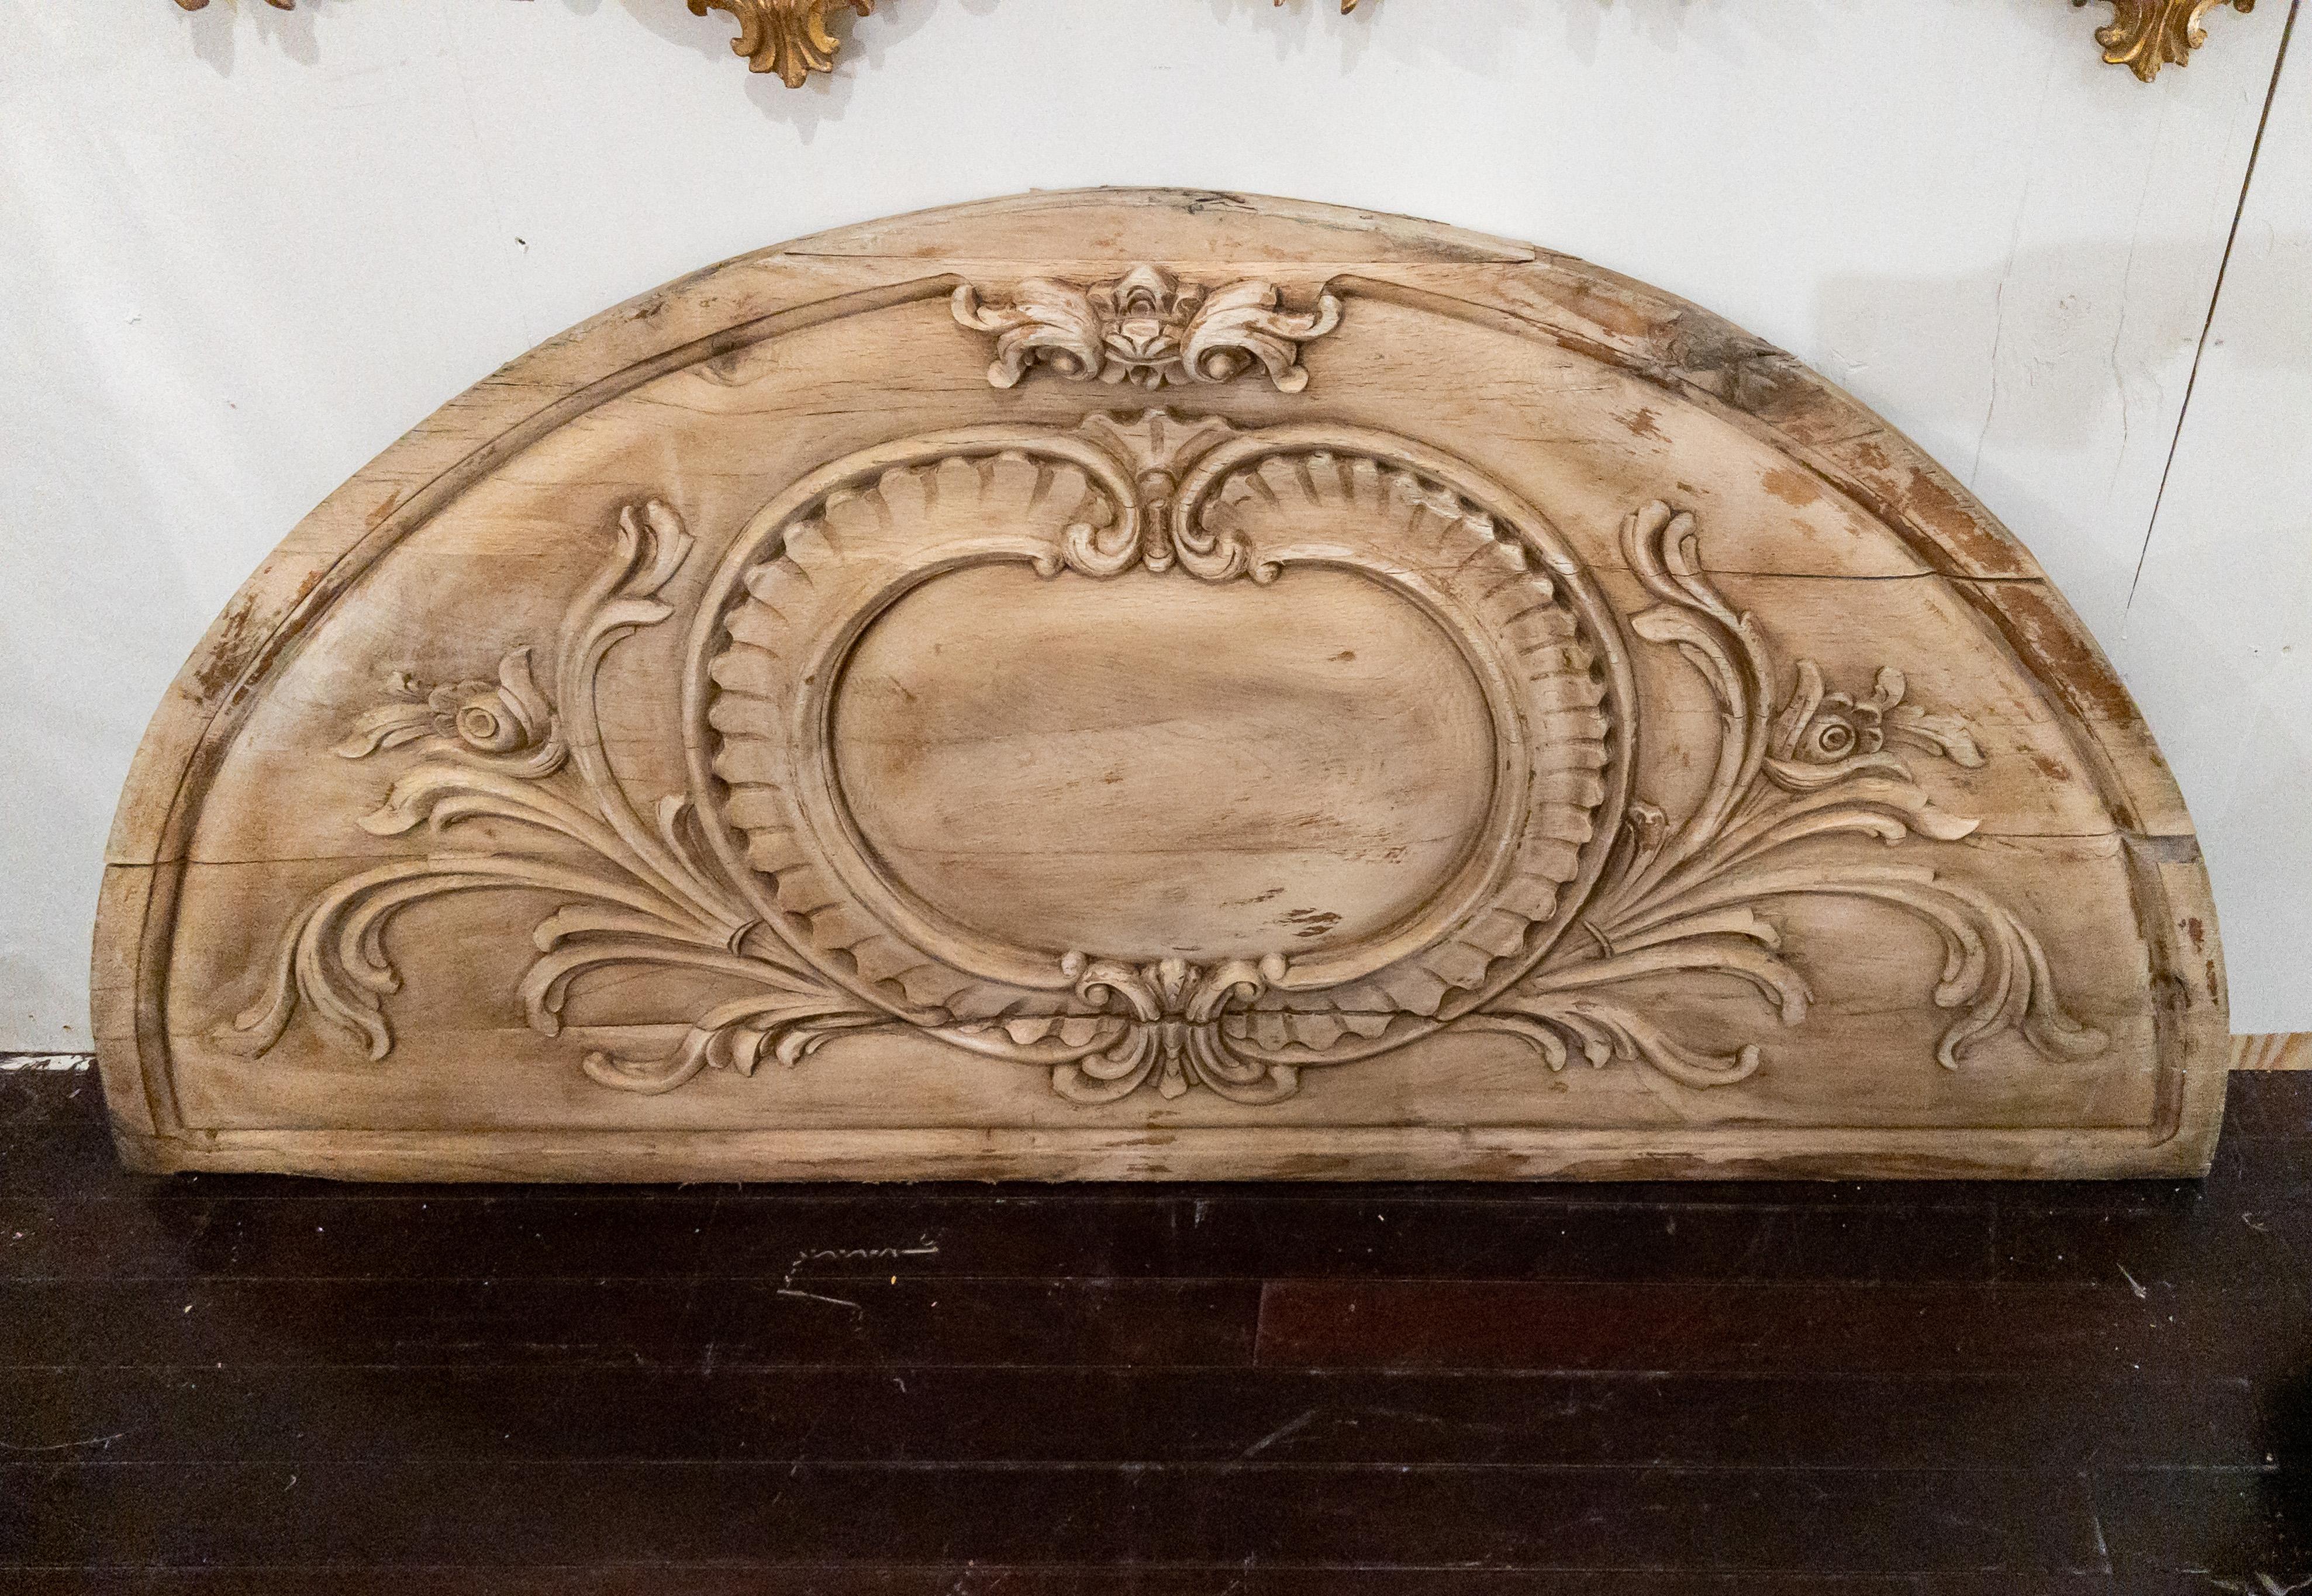 Monumental Arched Wood Architectural Fragment with Carvings from France. The wood has a bleached appearance. This piece could be used as a head board or to add architectural detail to a space.